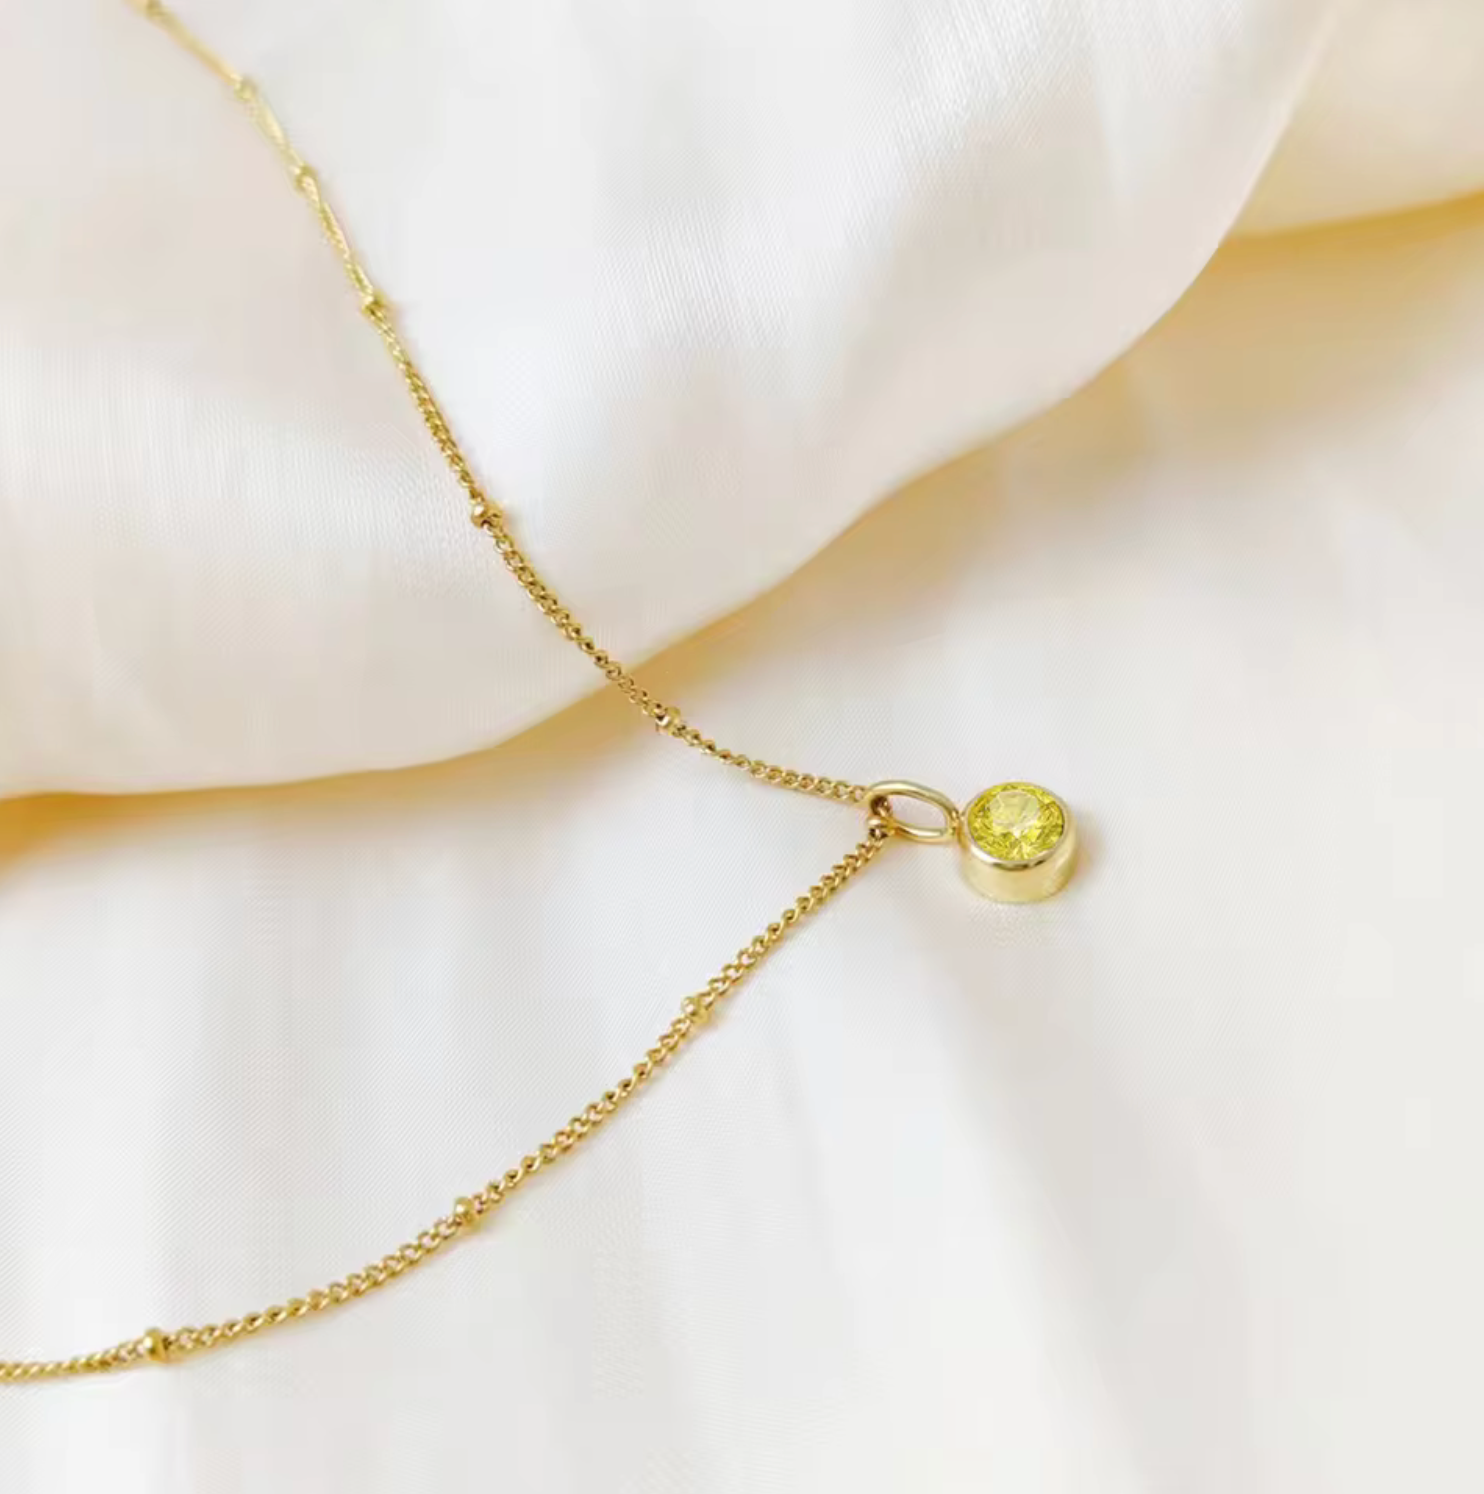 Waterproof birthstone necklace • Gold chain • stainless steel